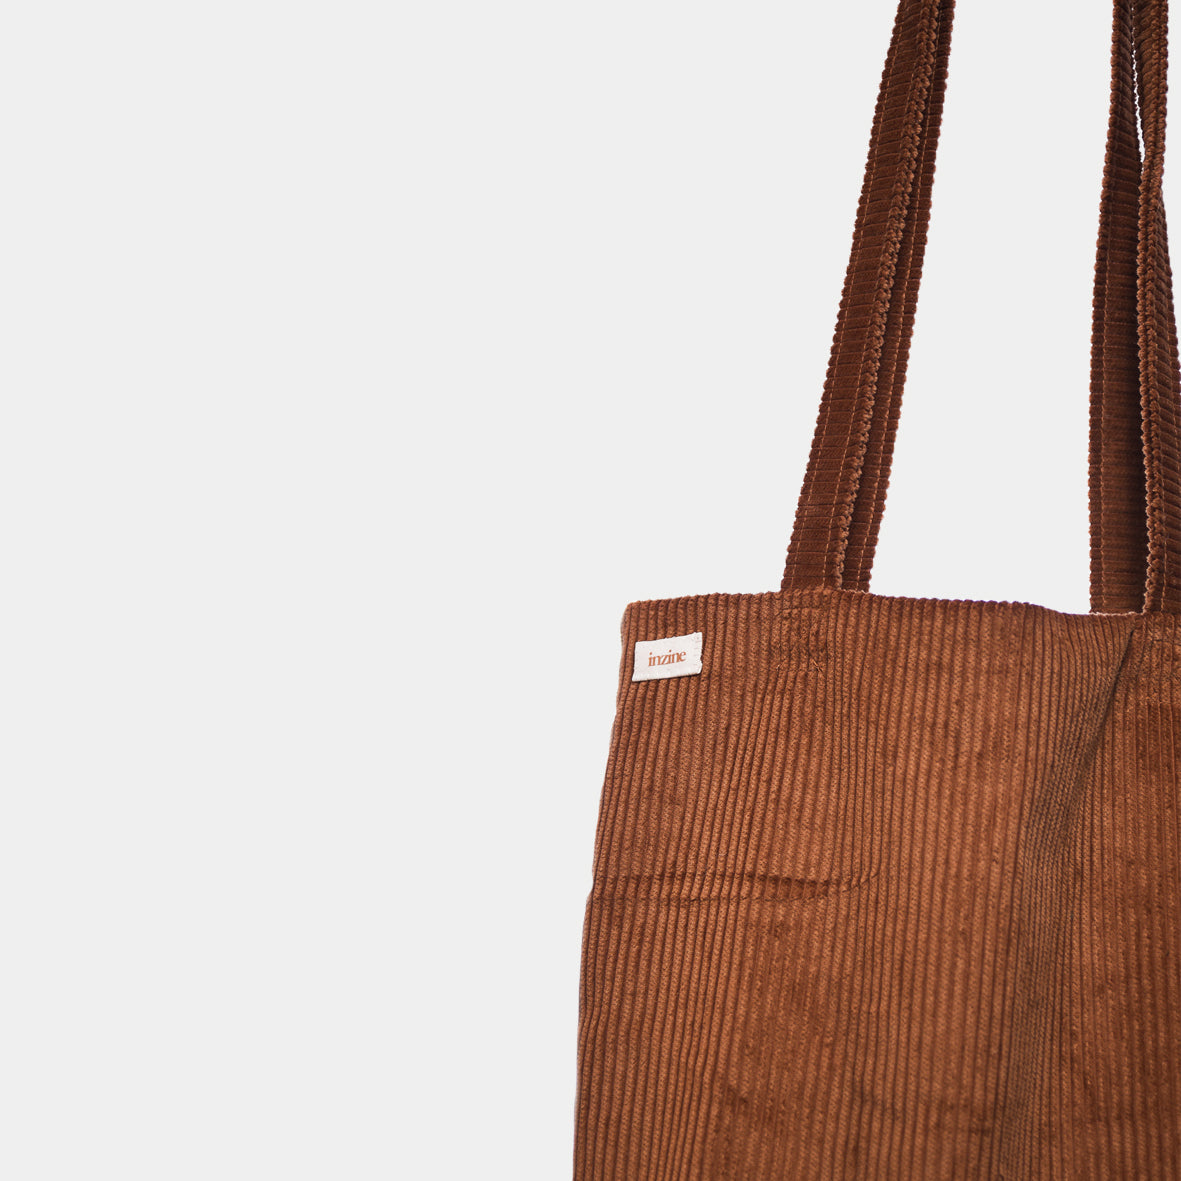 Corduroy tote bag, toffee brown colour with brown inzine label. Hand made in New Zealand.